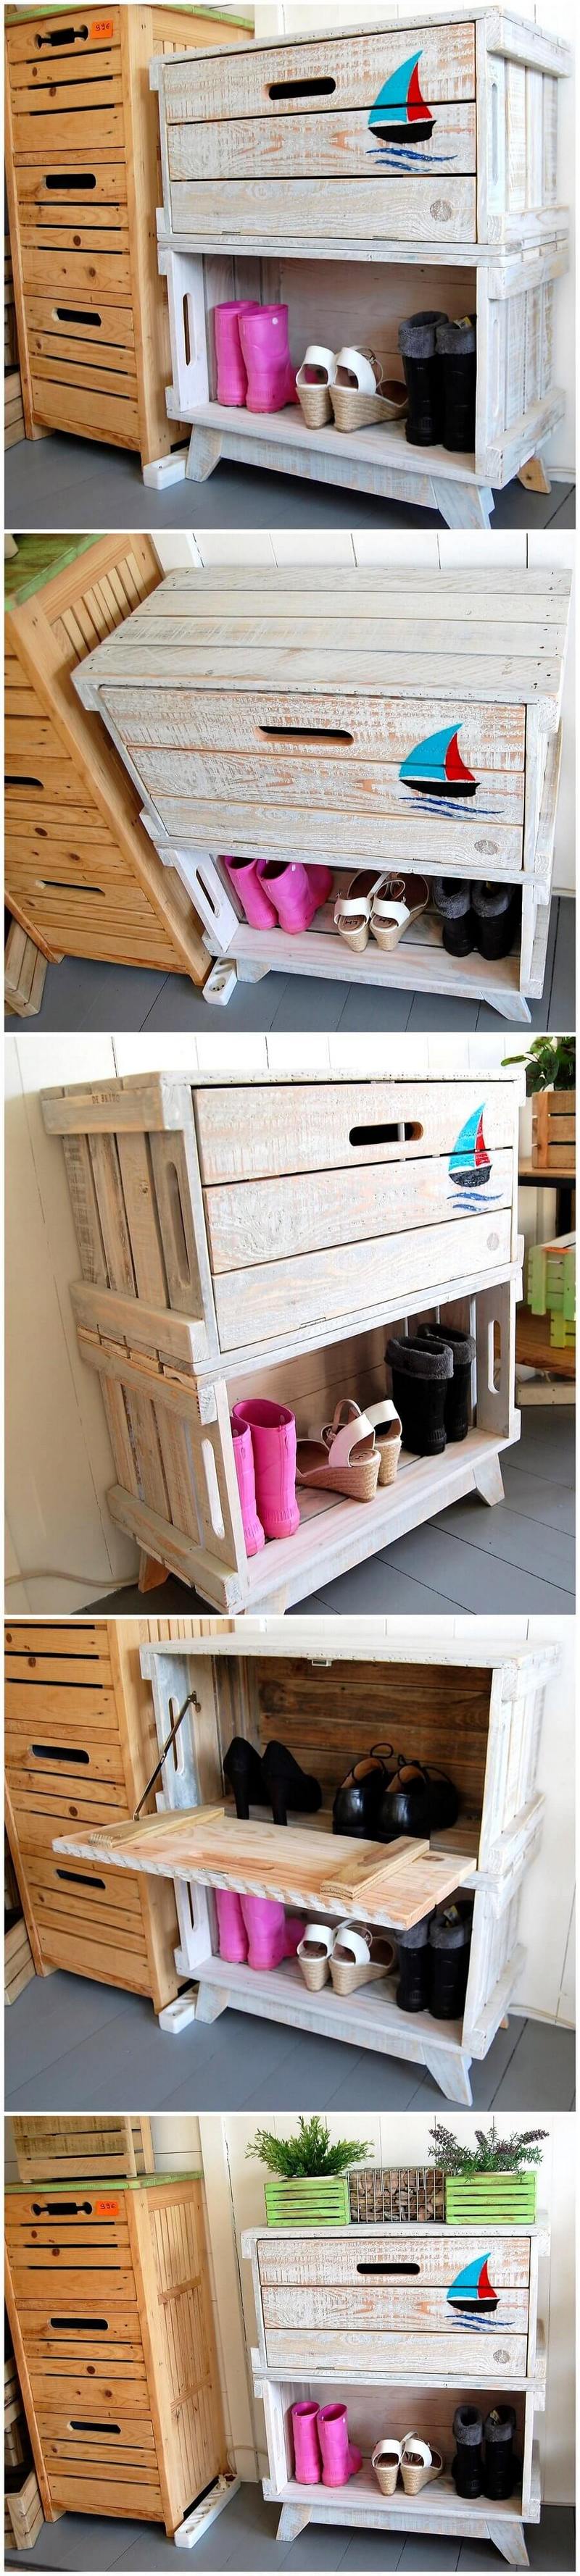 Latest DIY Ideas to Recycle Used Wooden Pallets | Page 2 | Wood Pallet ...